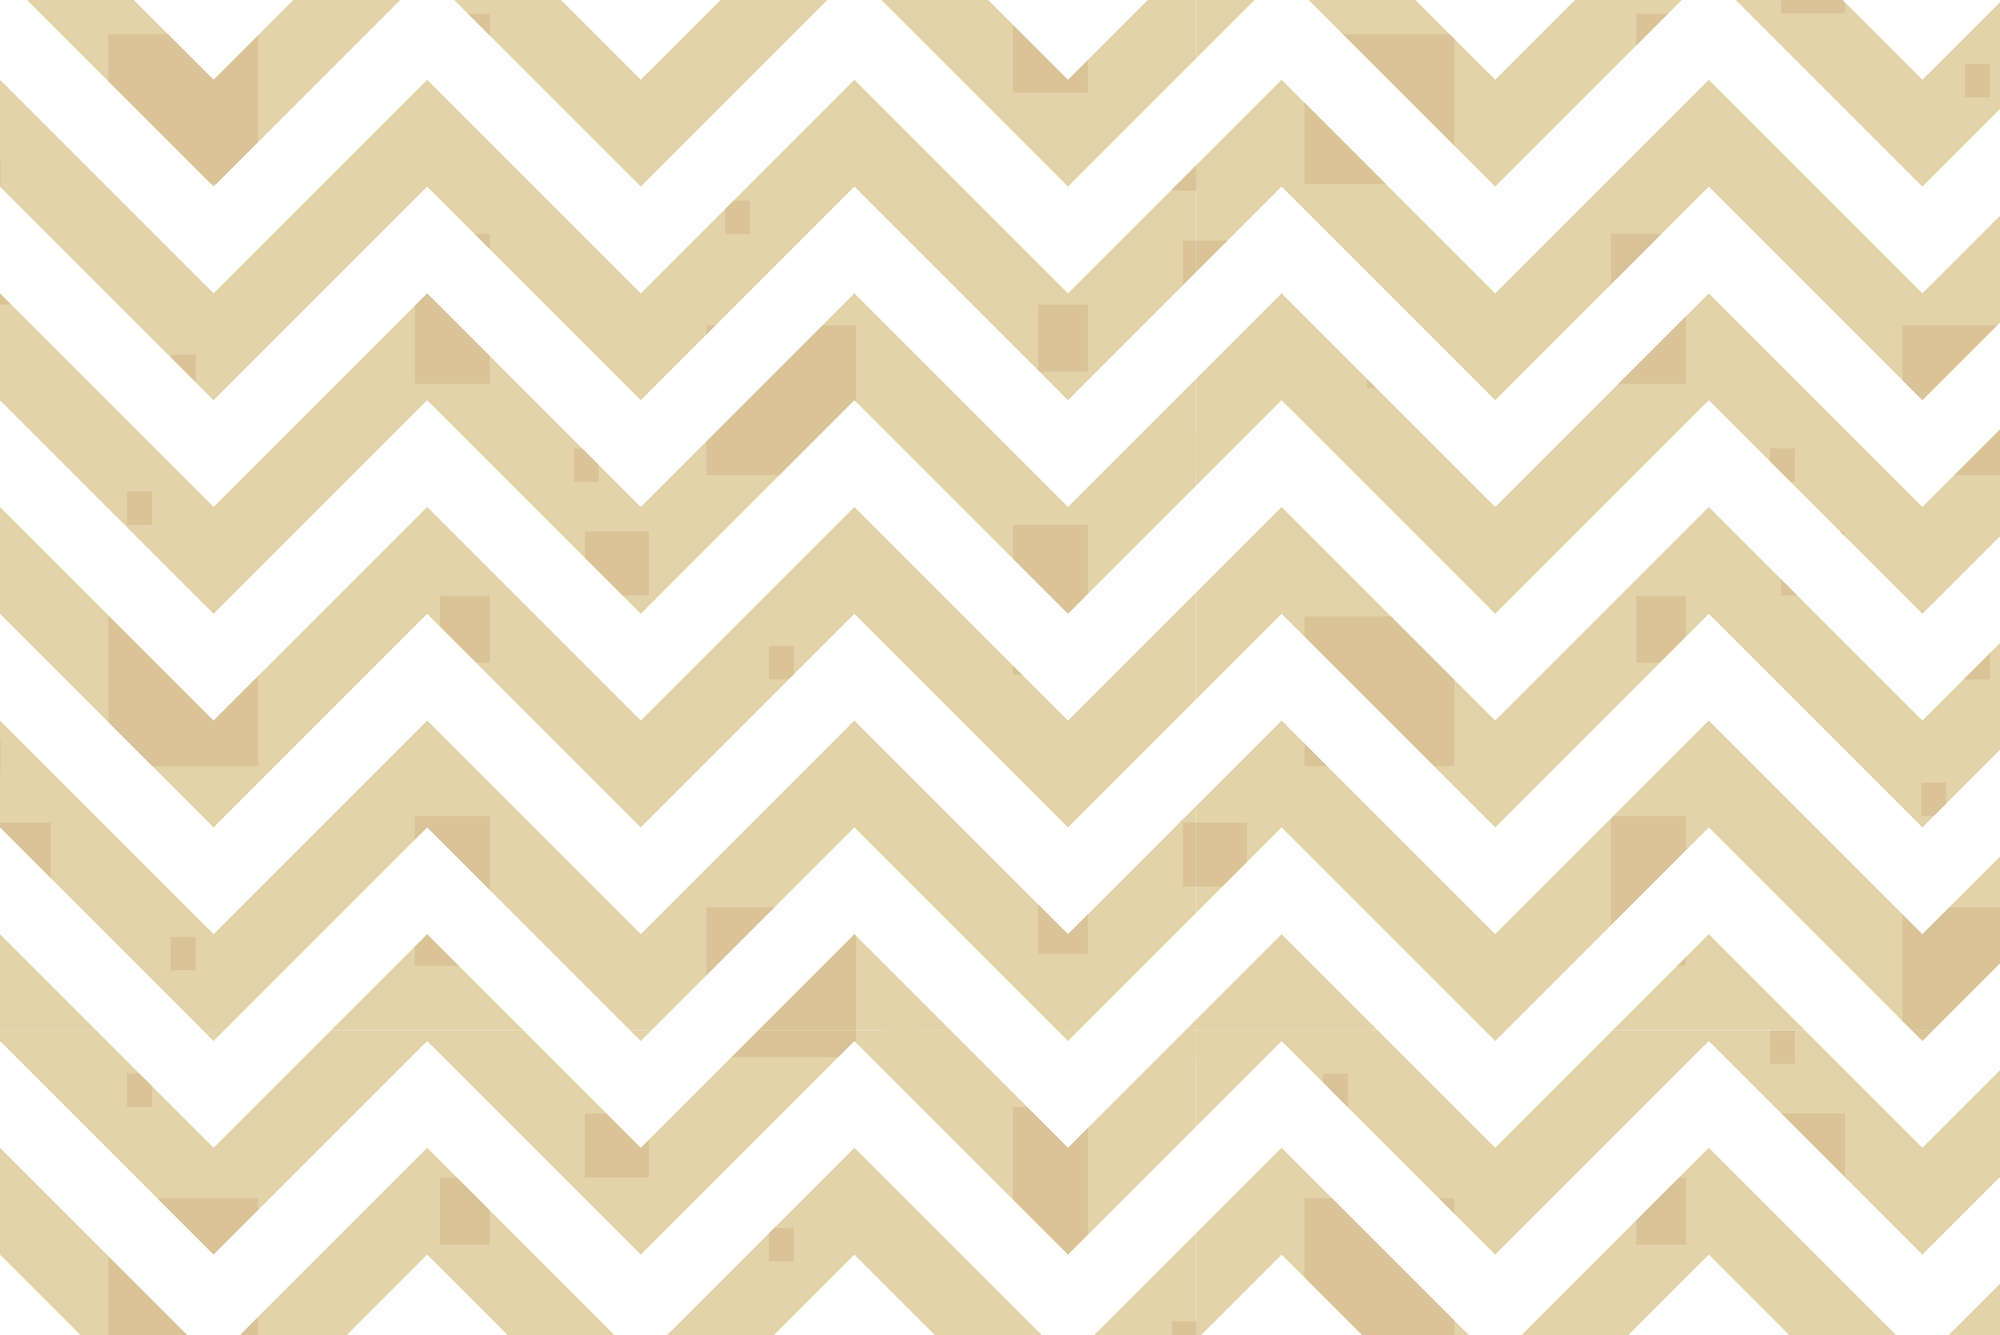             Design wall mural zig zag pattern with small squares yellow on matt smooth non-woven
        